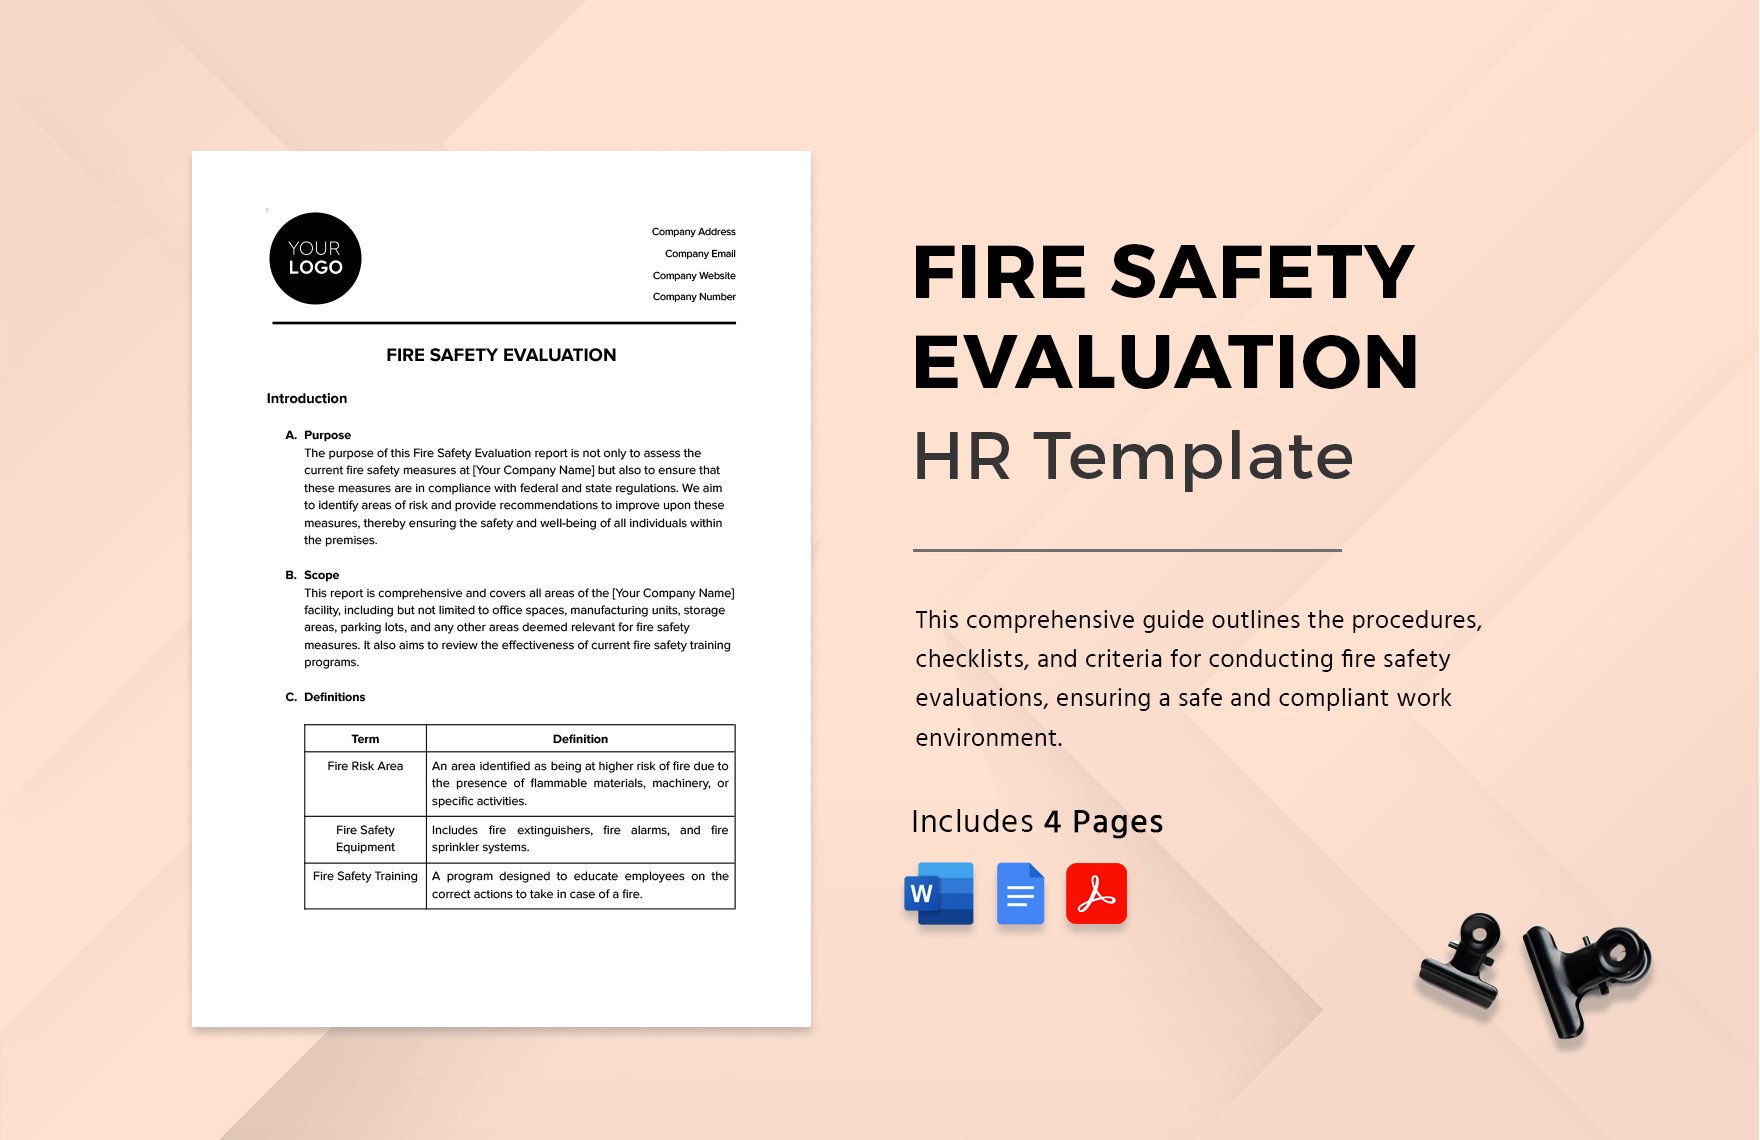 Fire Safety Evaluation HR Template